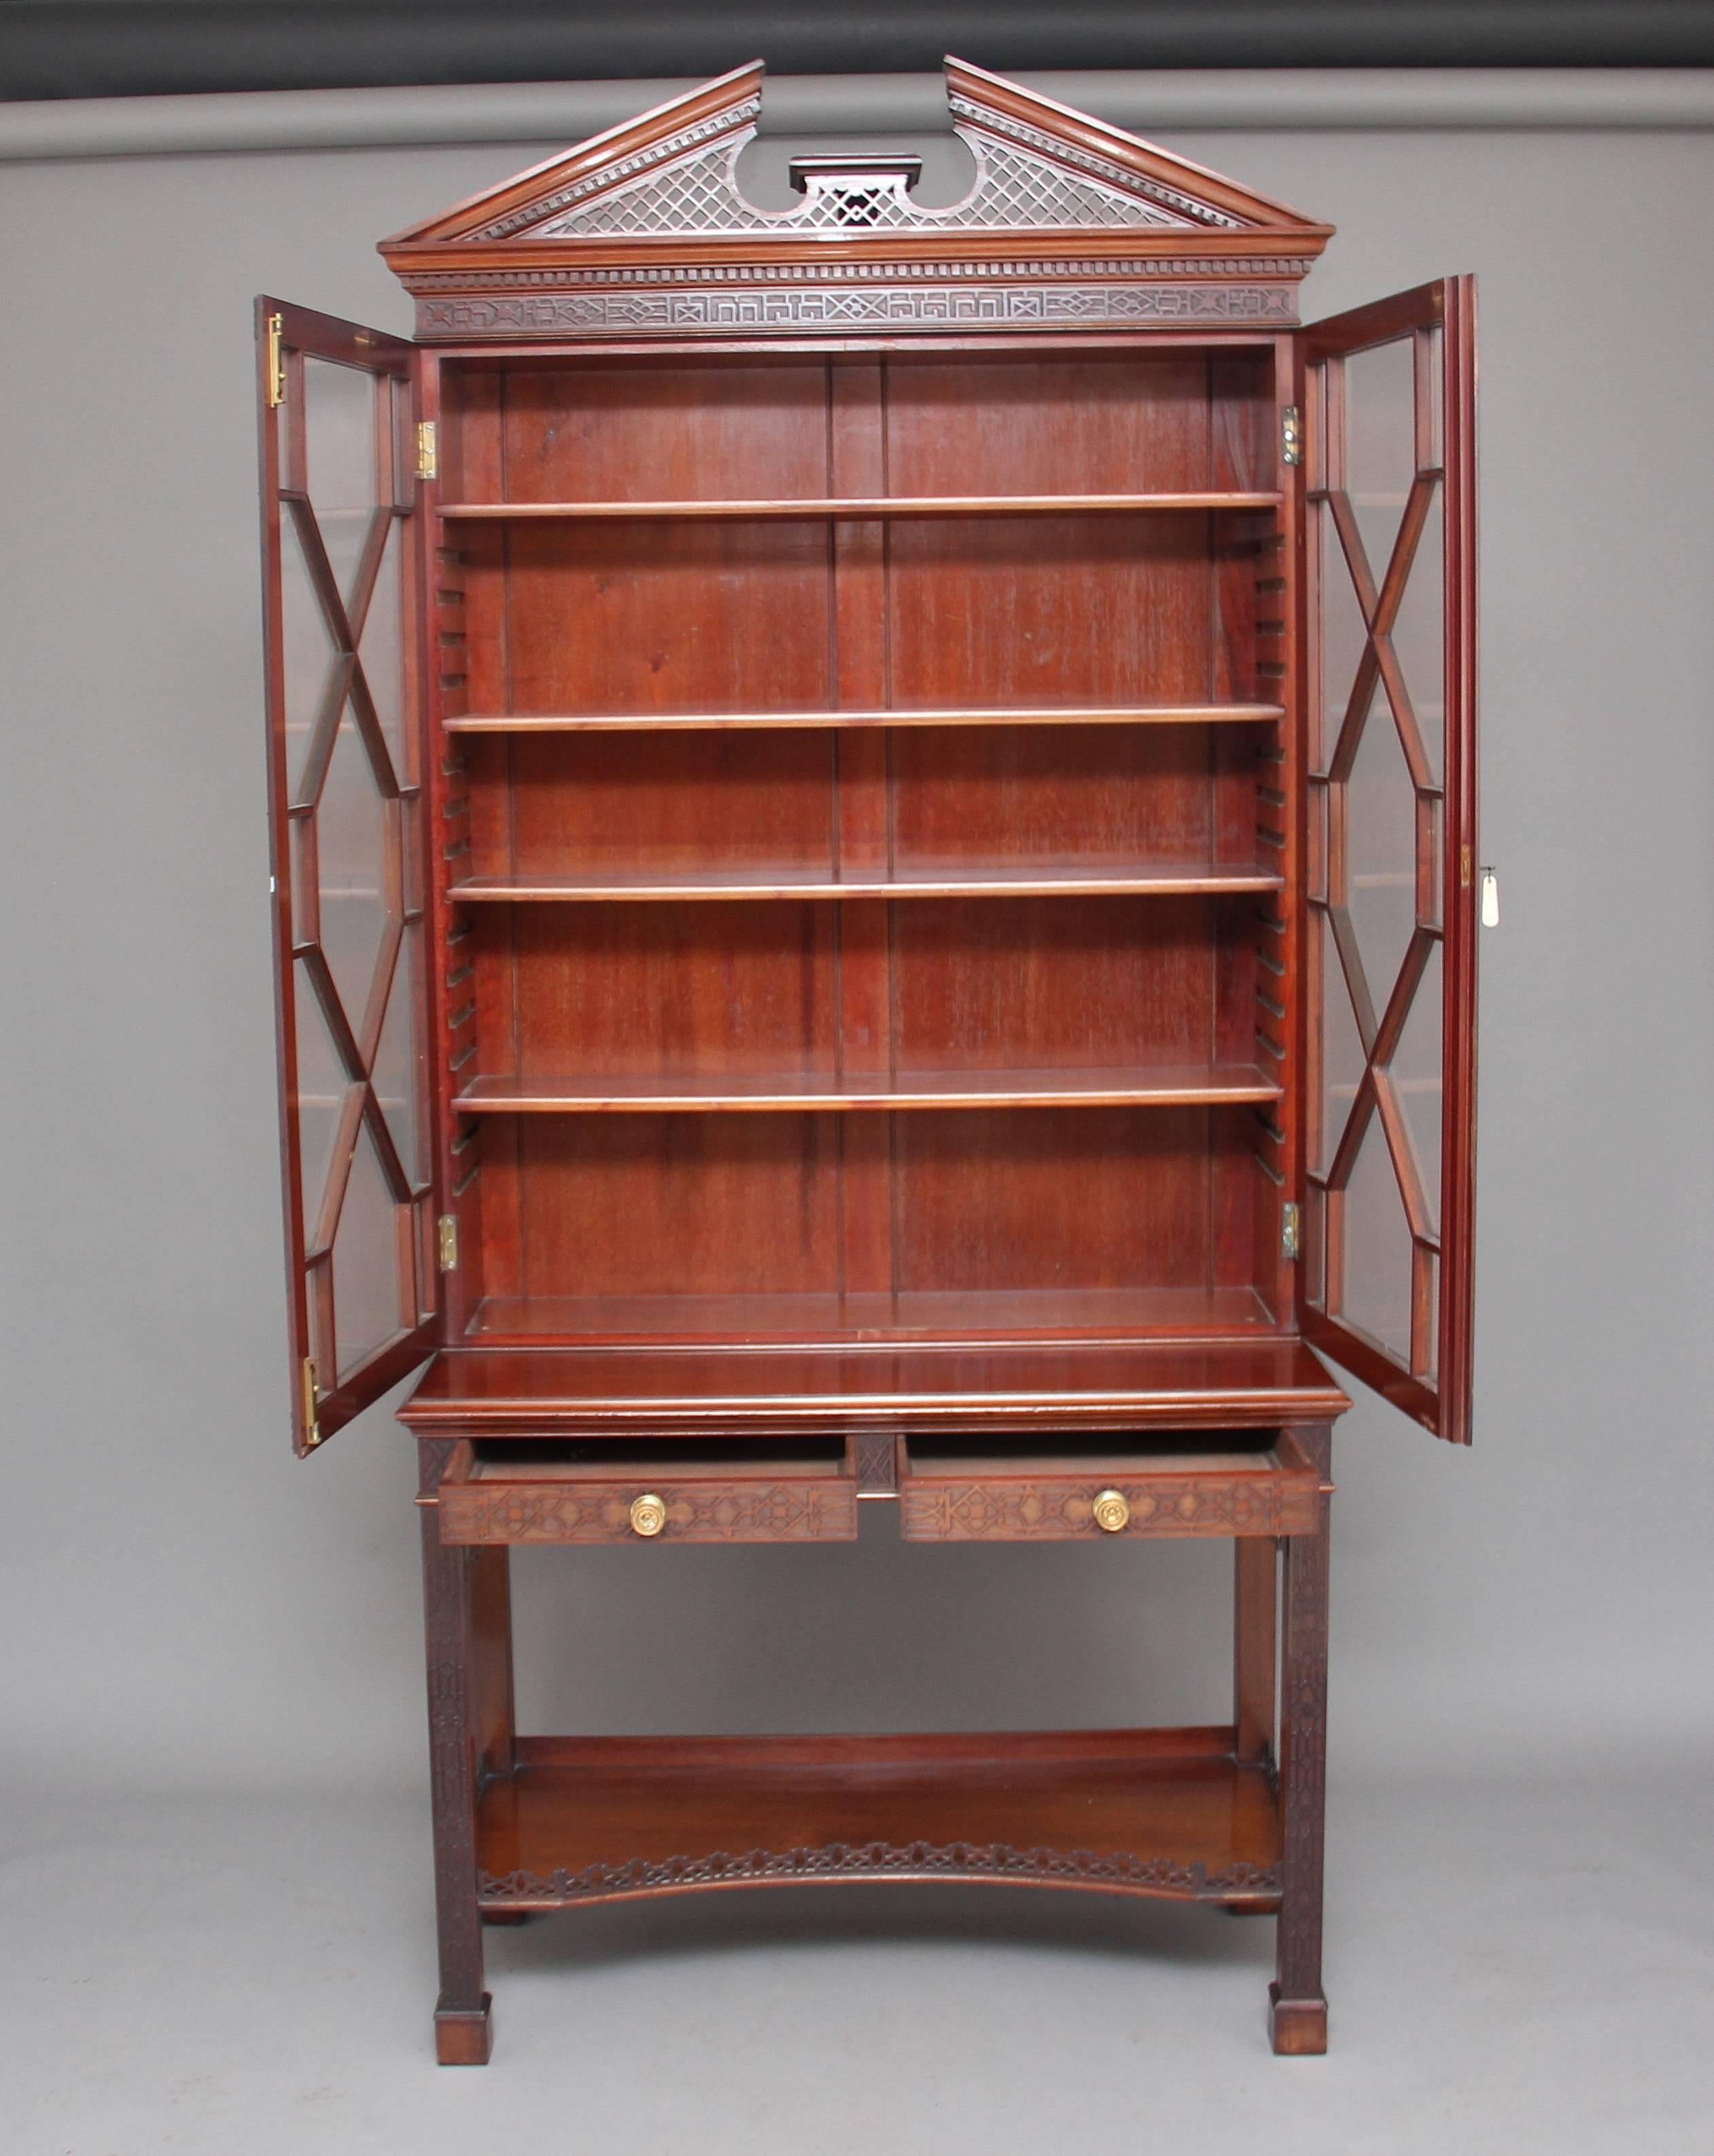 A superb quality early 20th century mahogany cabinet in the Chinese Chippendale manor by Edwards & Roberts, the top of the cabinet has a broken arch pediment with dentil mouldings and pierced fret supports, with the main section profusely decorated